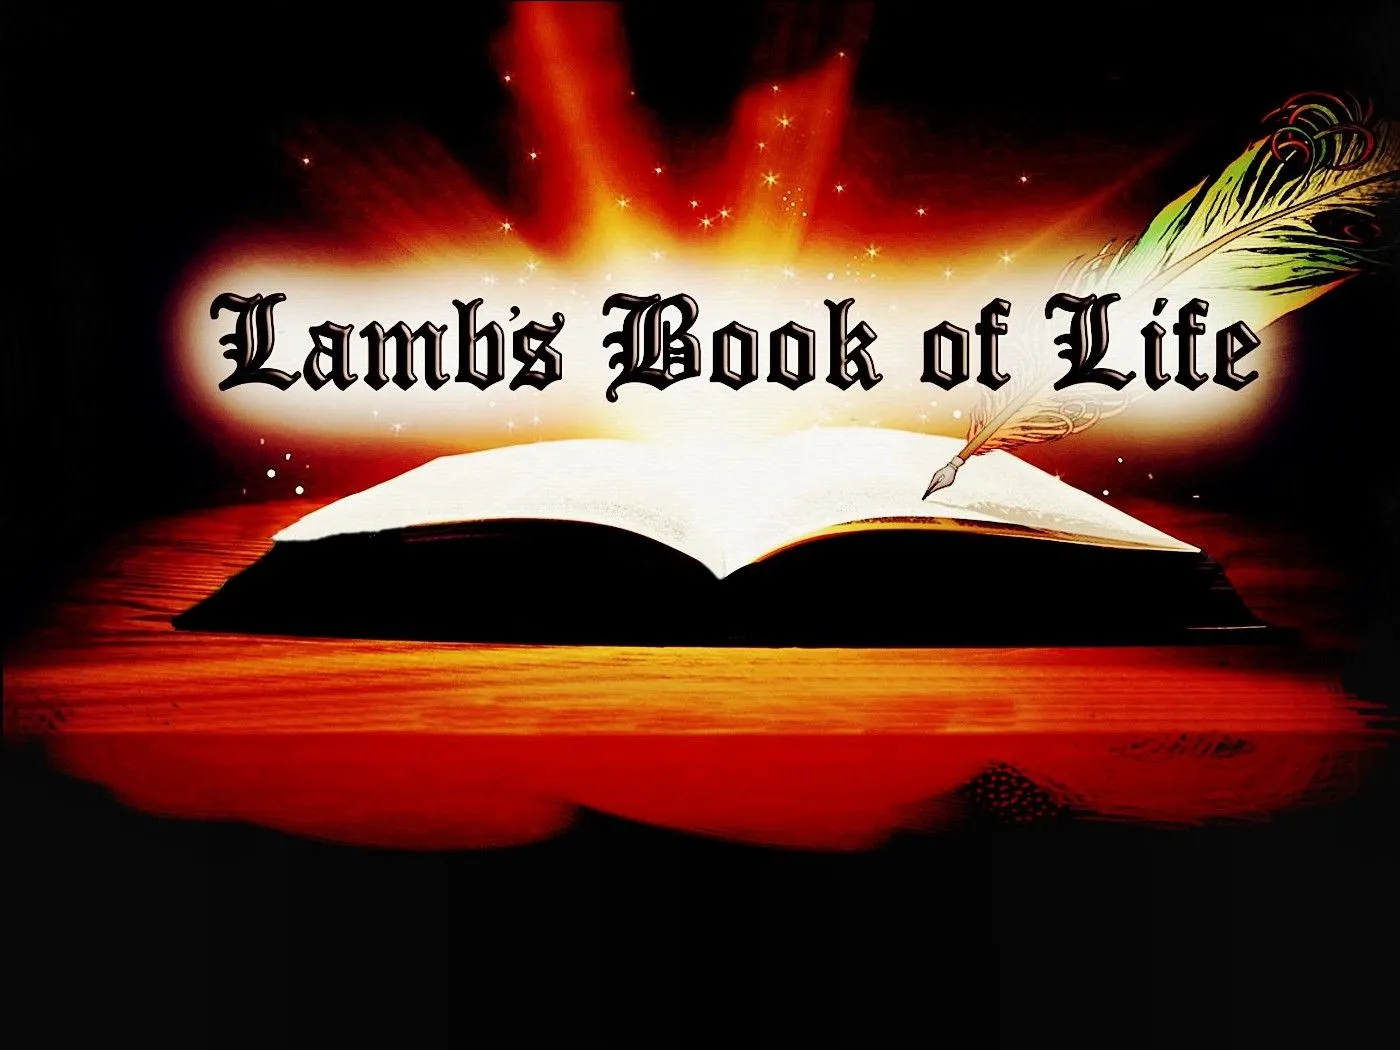 the lamb’s book of life